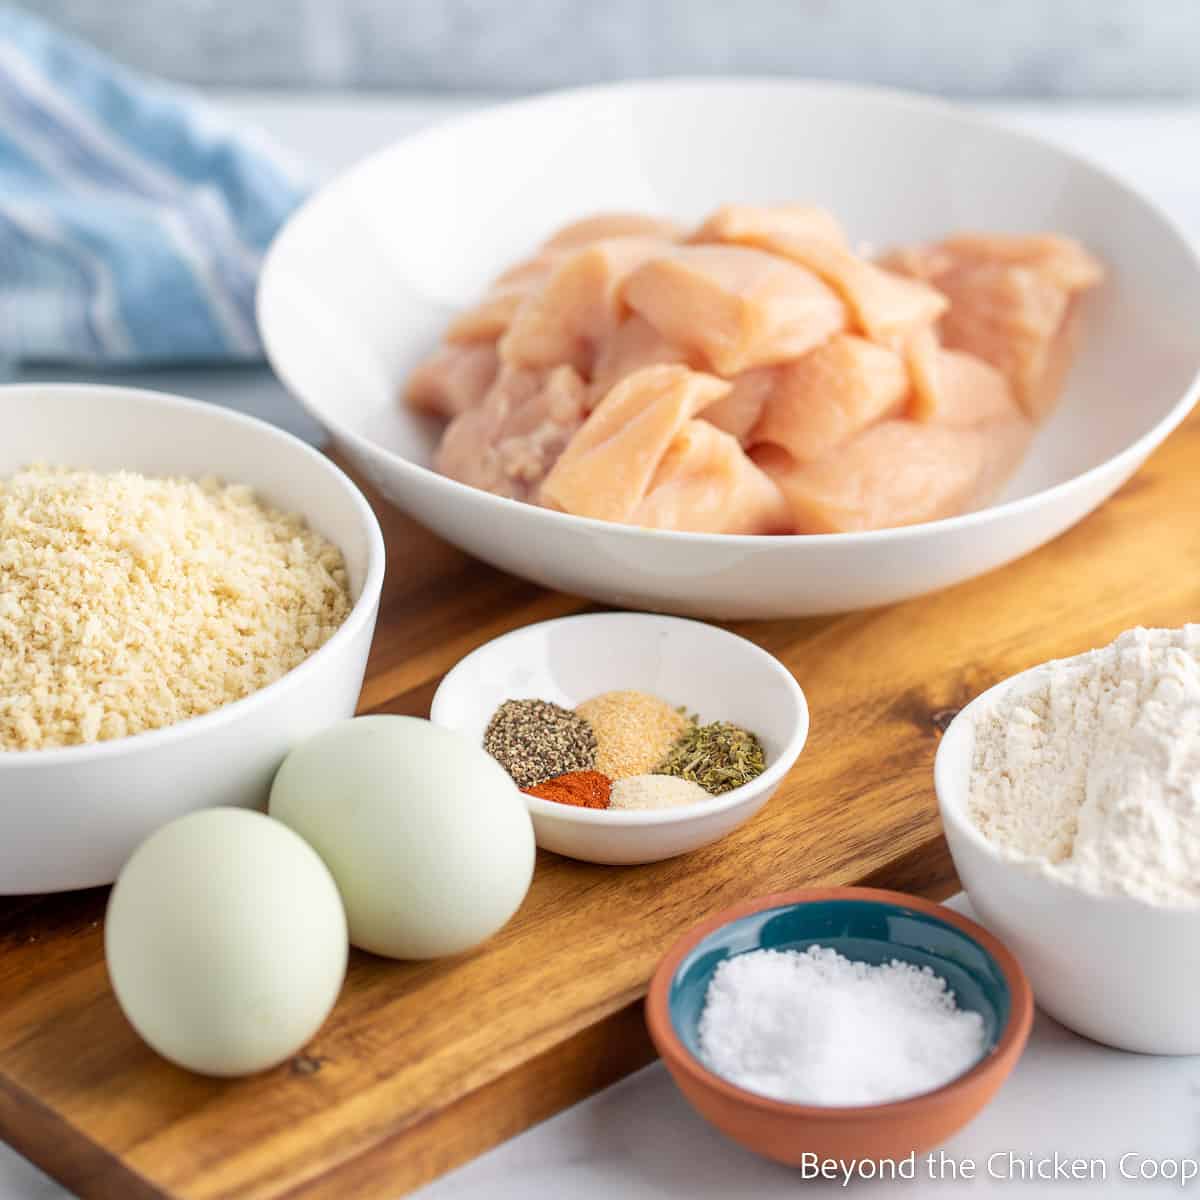 Ingredients for making chicken nuggets. 